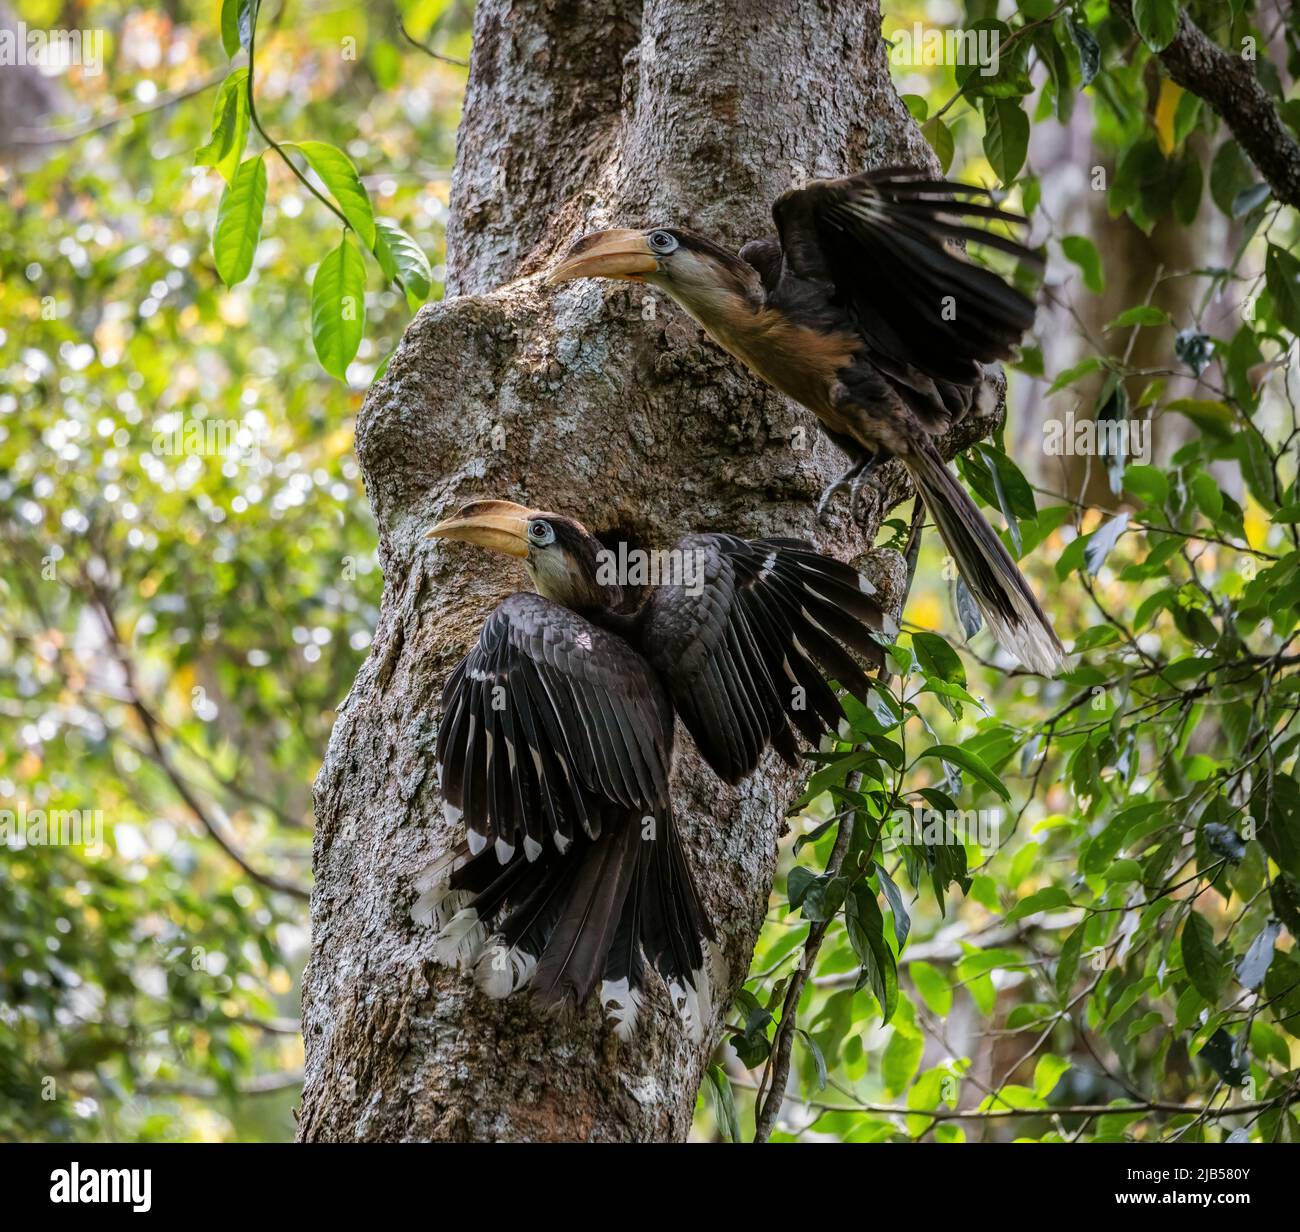 Tickell's brown hornbill birds on the tree in the natural forest. Stock Photo